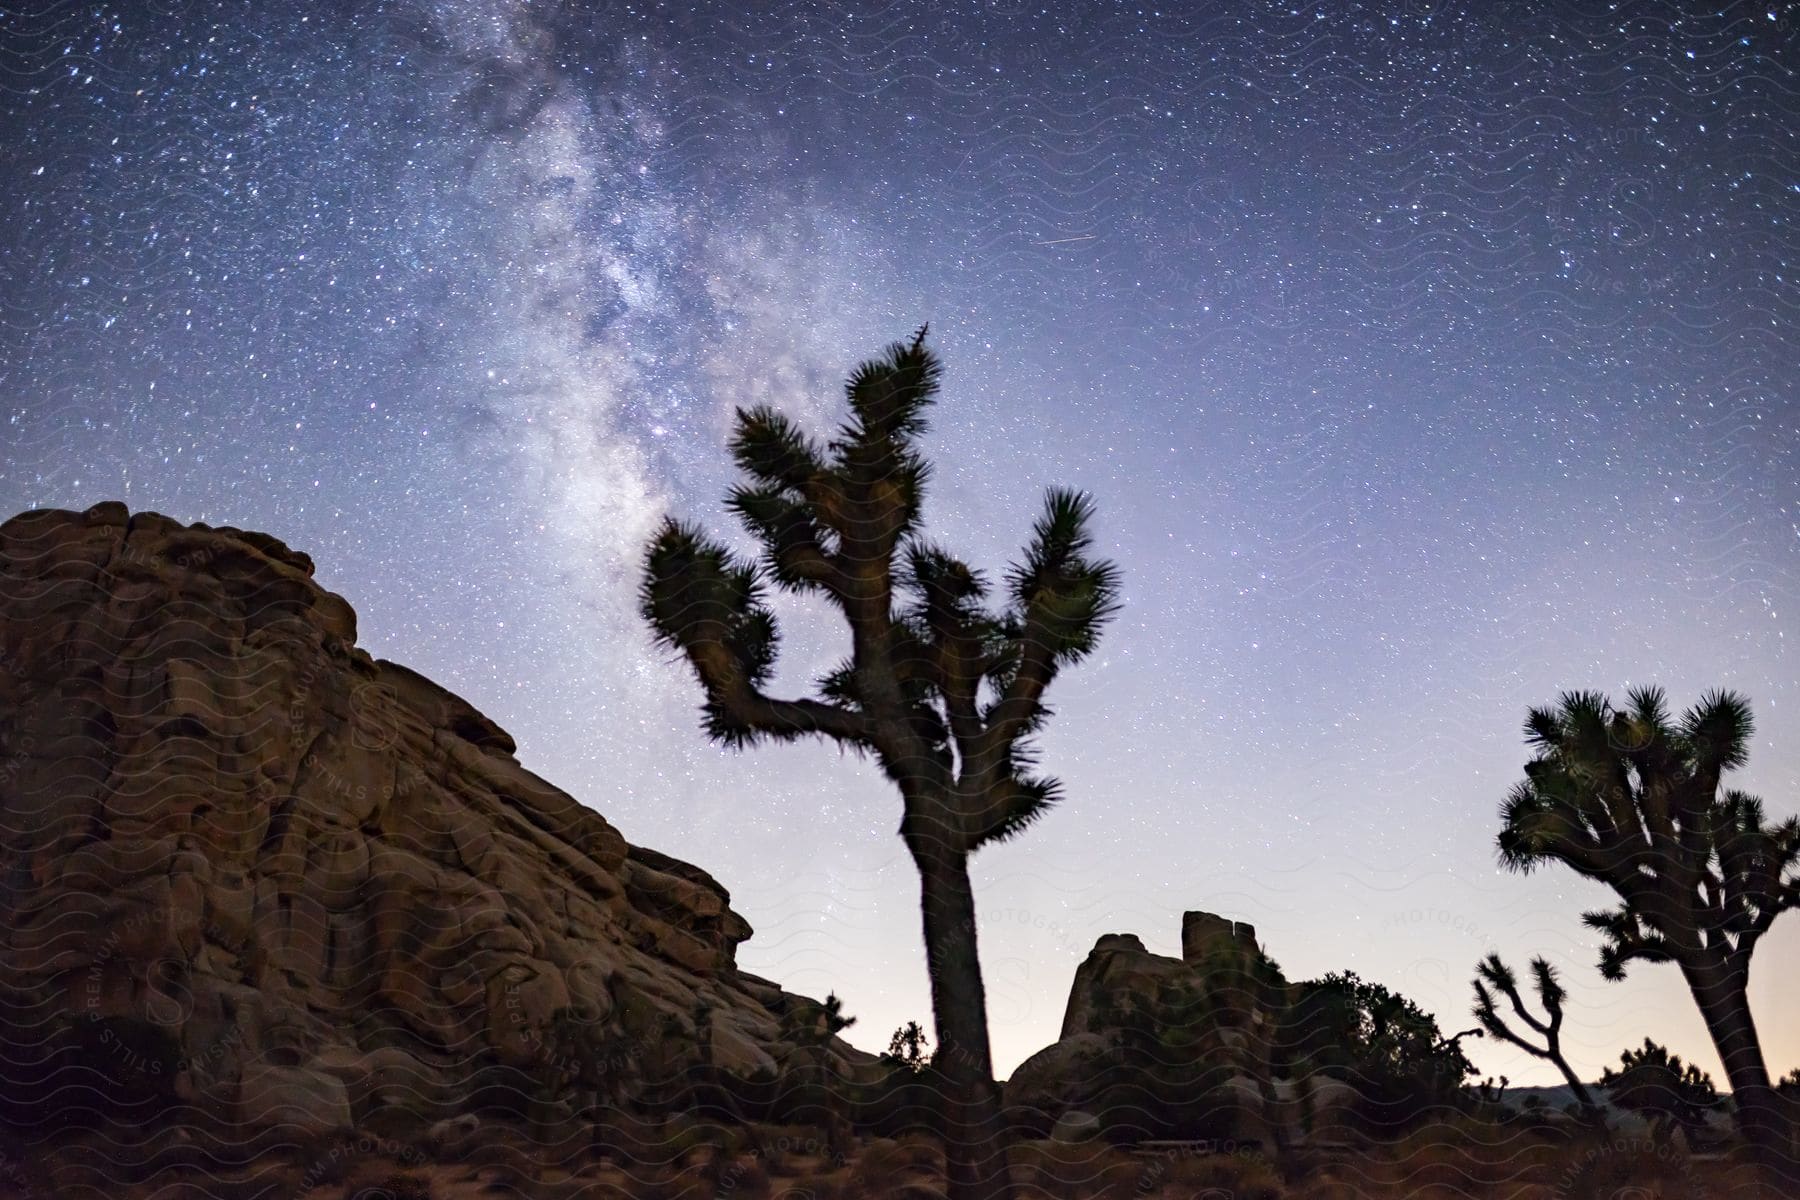 Mountains and rock formations among trees and plants under the milky way in the night sky